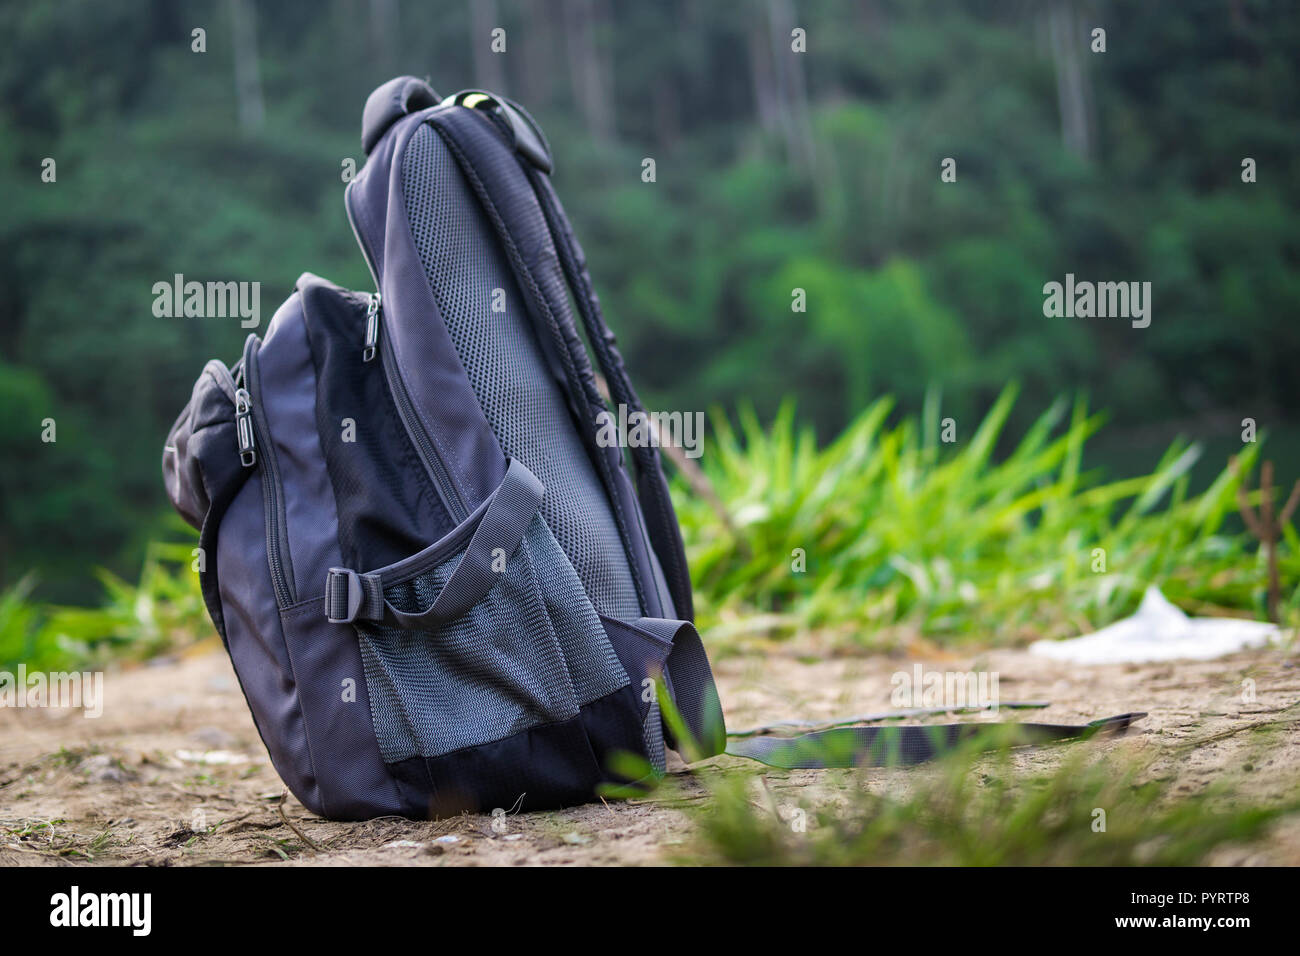 A rucksack on a ground with a blurry nature background. Stock Photo